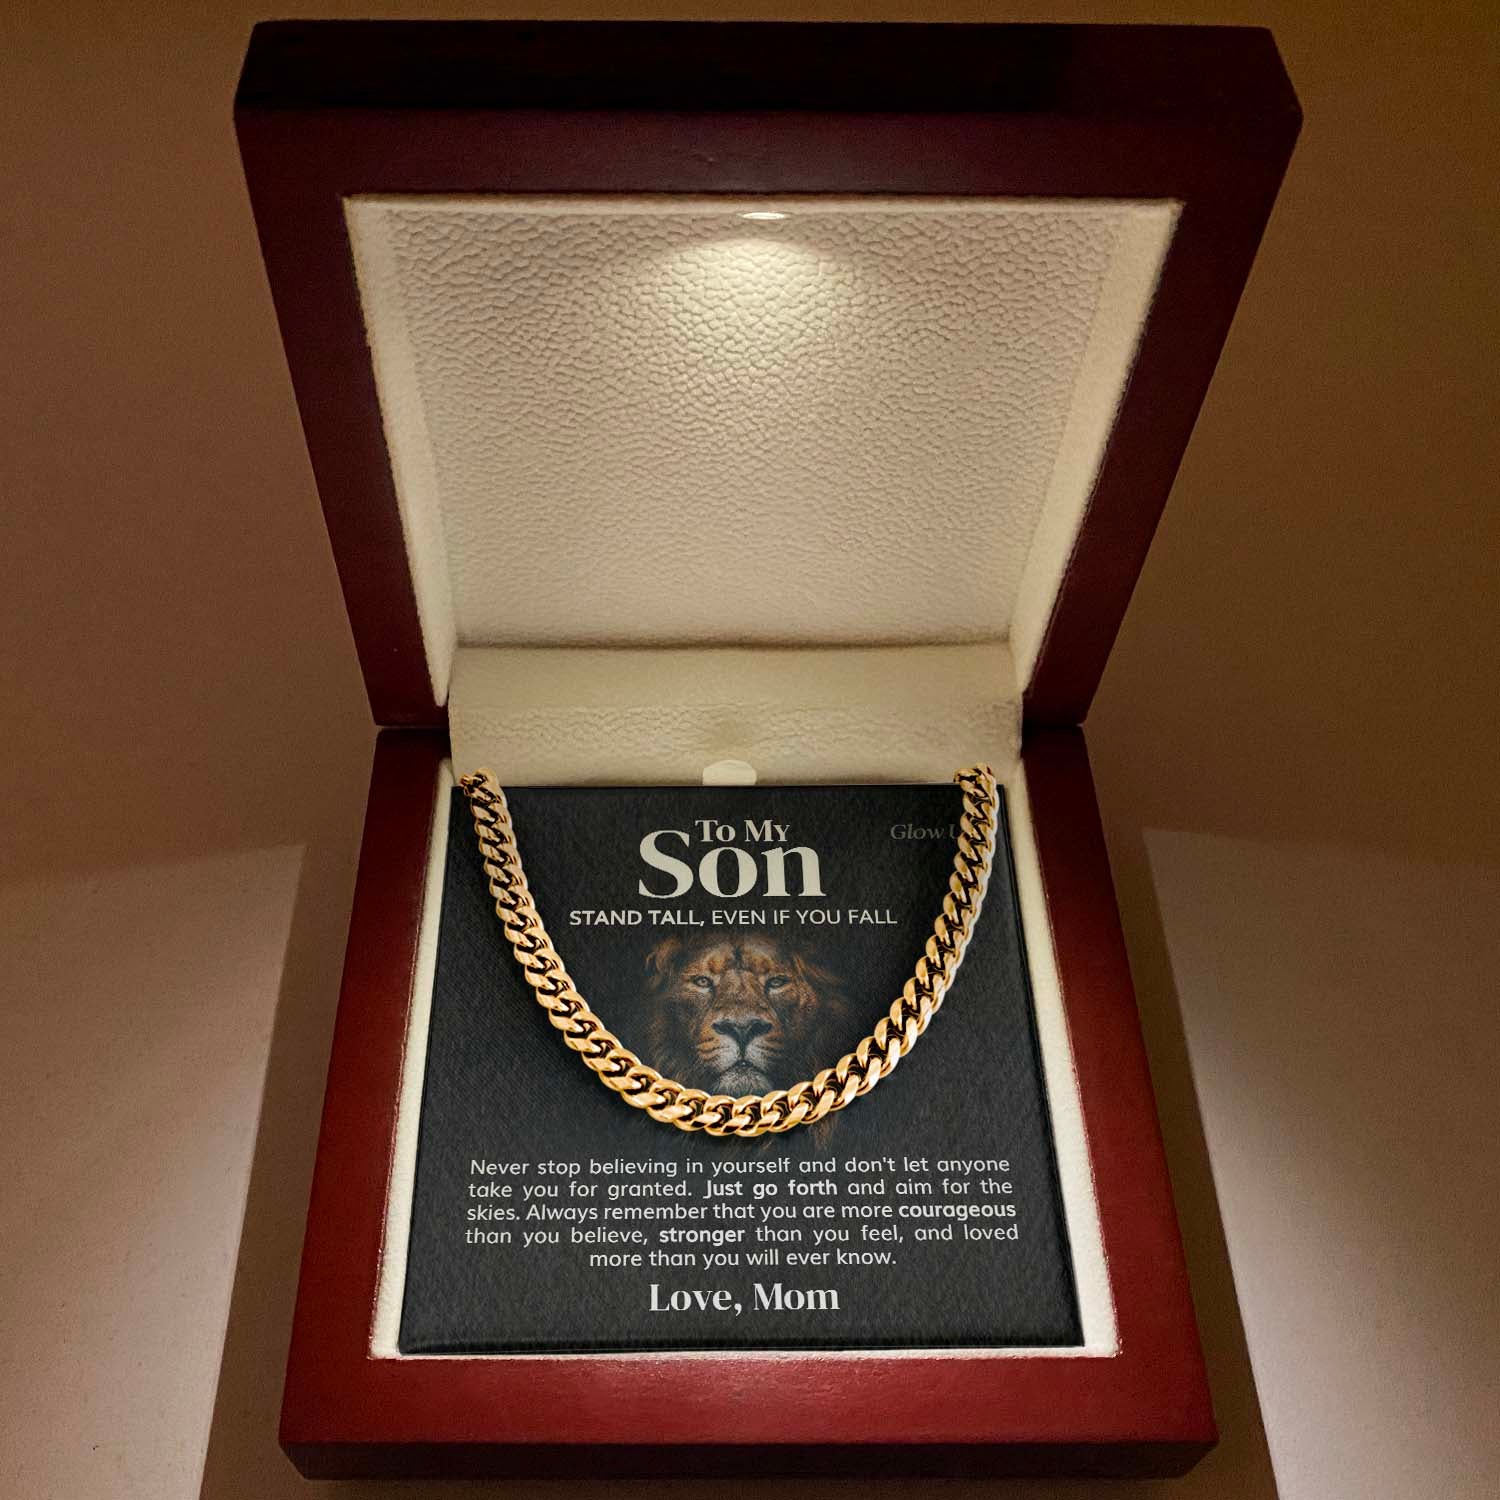 ShineOn Fulfillment Jewelry 14K Yellow Gold Finish / Luxury LED Box To my son - Stand tall my son - Cuban Link Chain